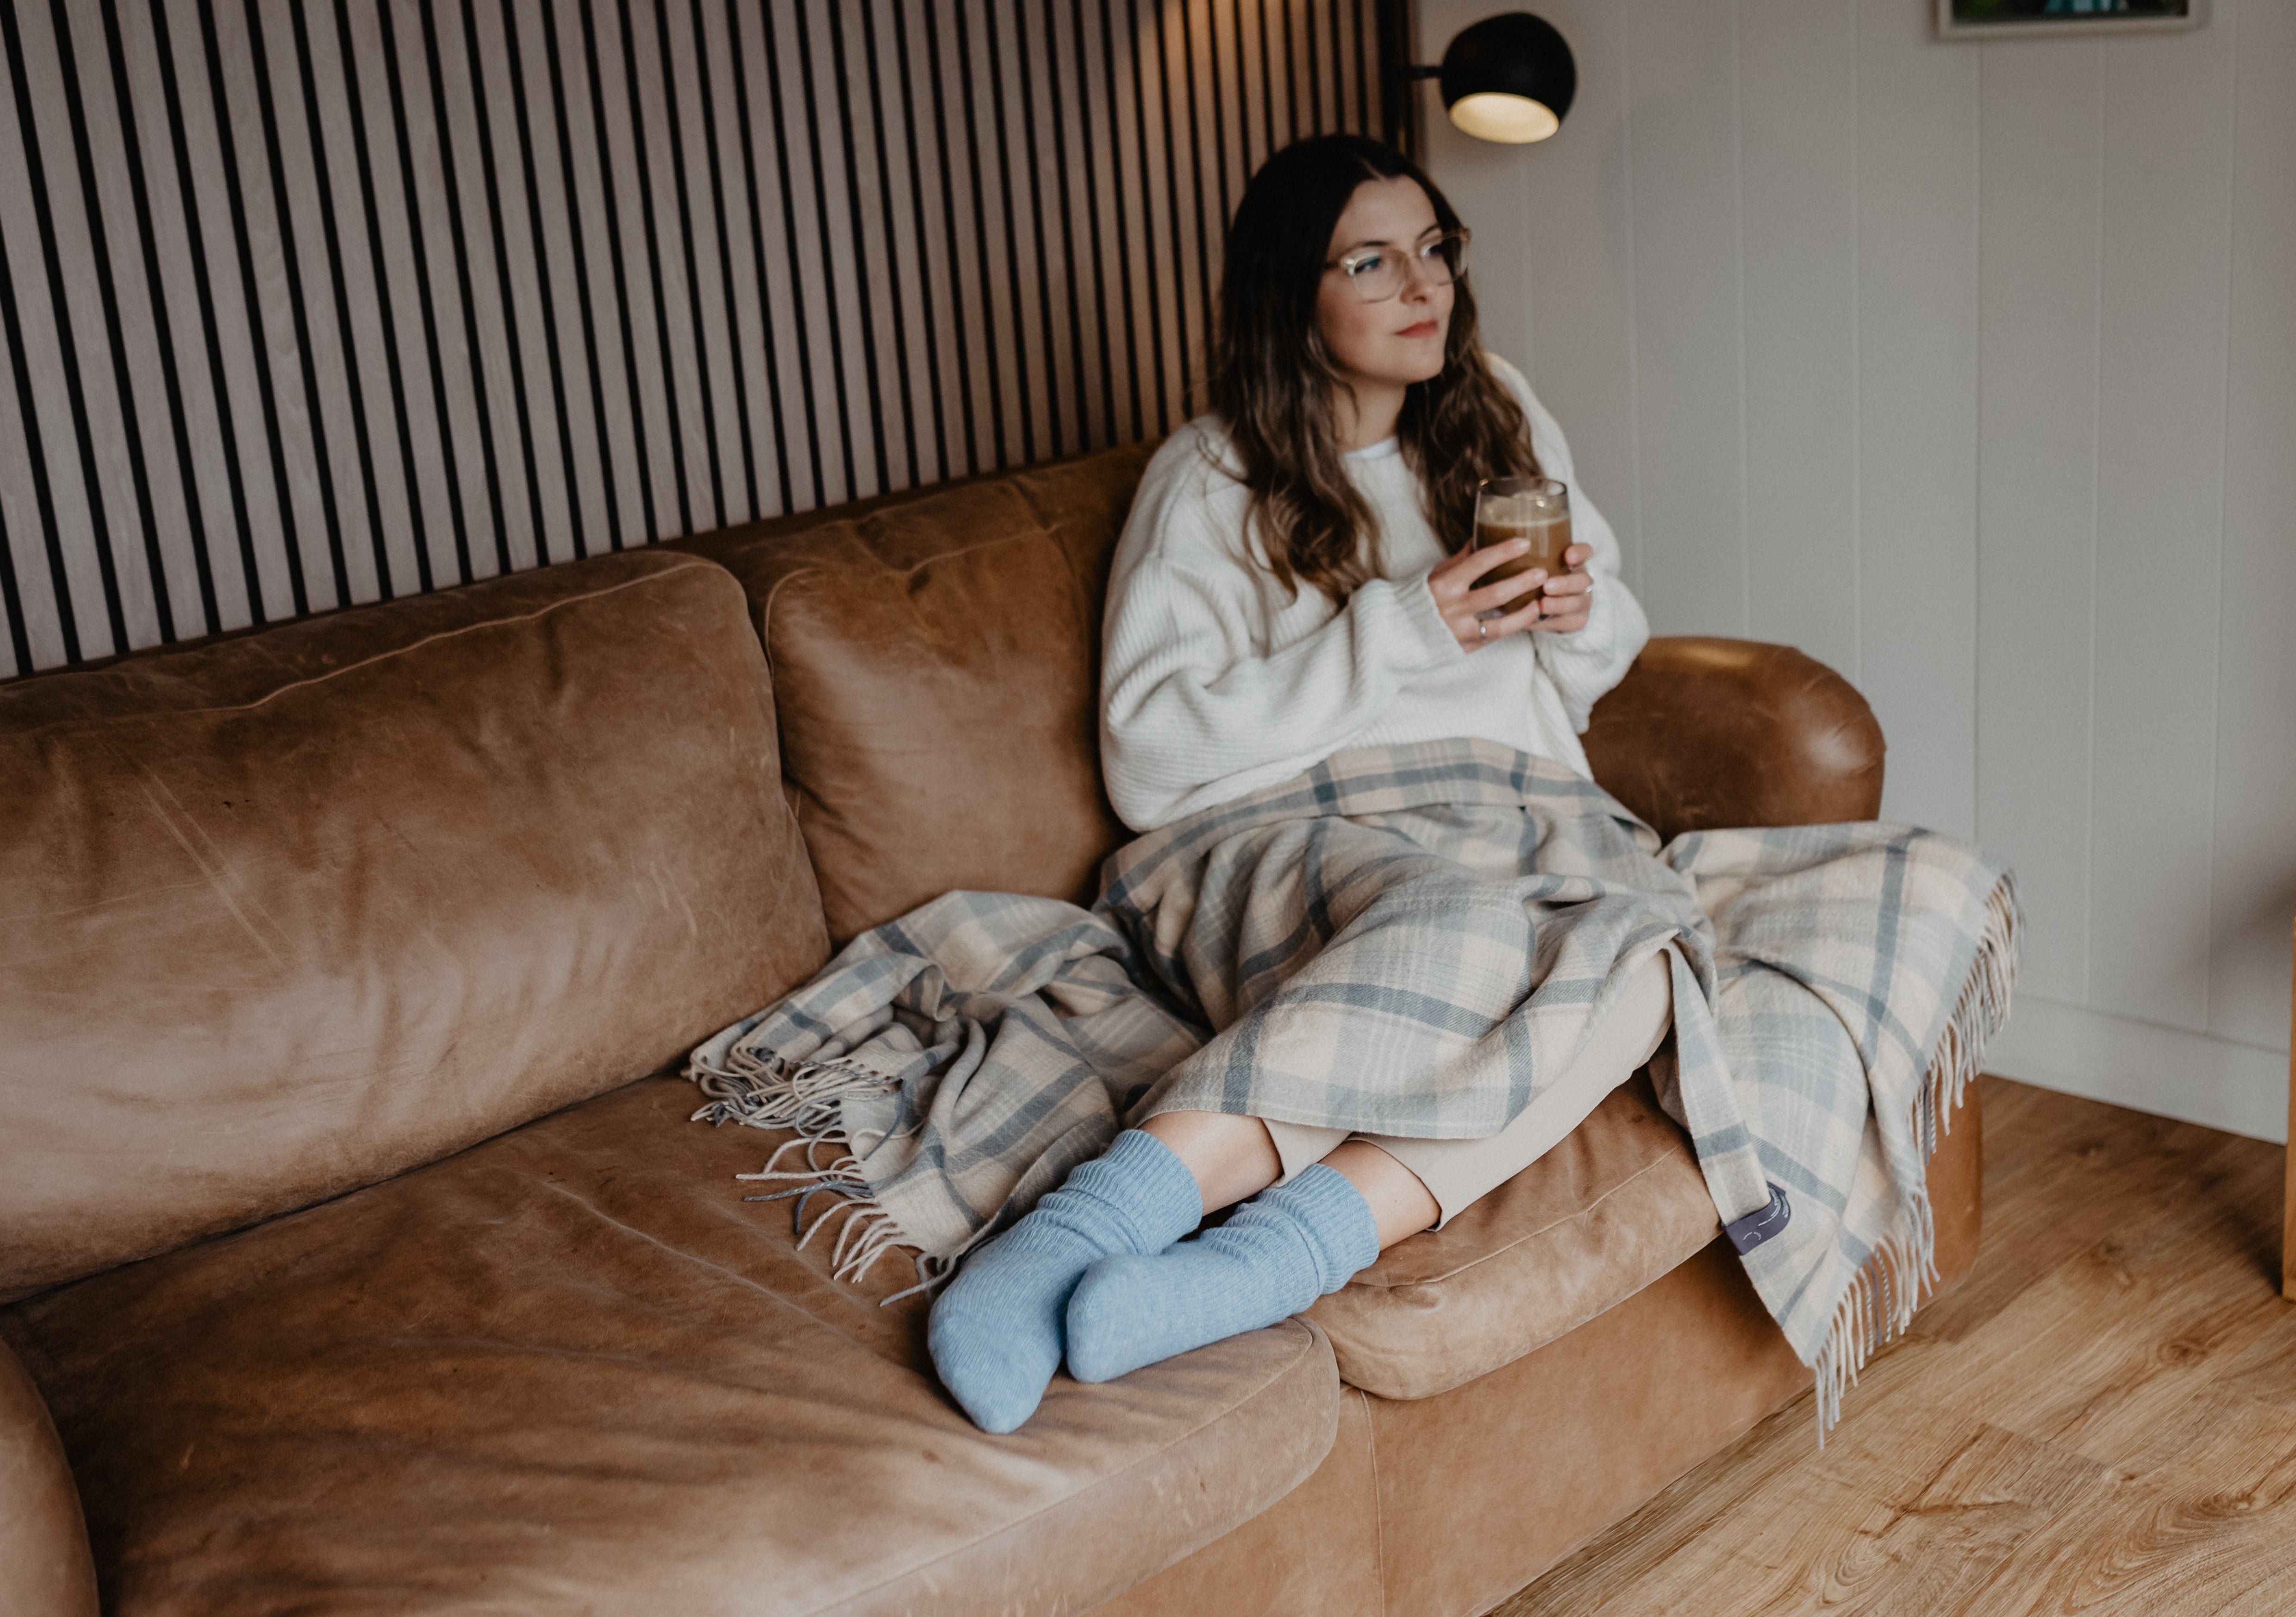 A girl sat on a couch with a knee blanket draped across her lap and wearing bed socks to help her sleep